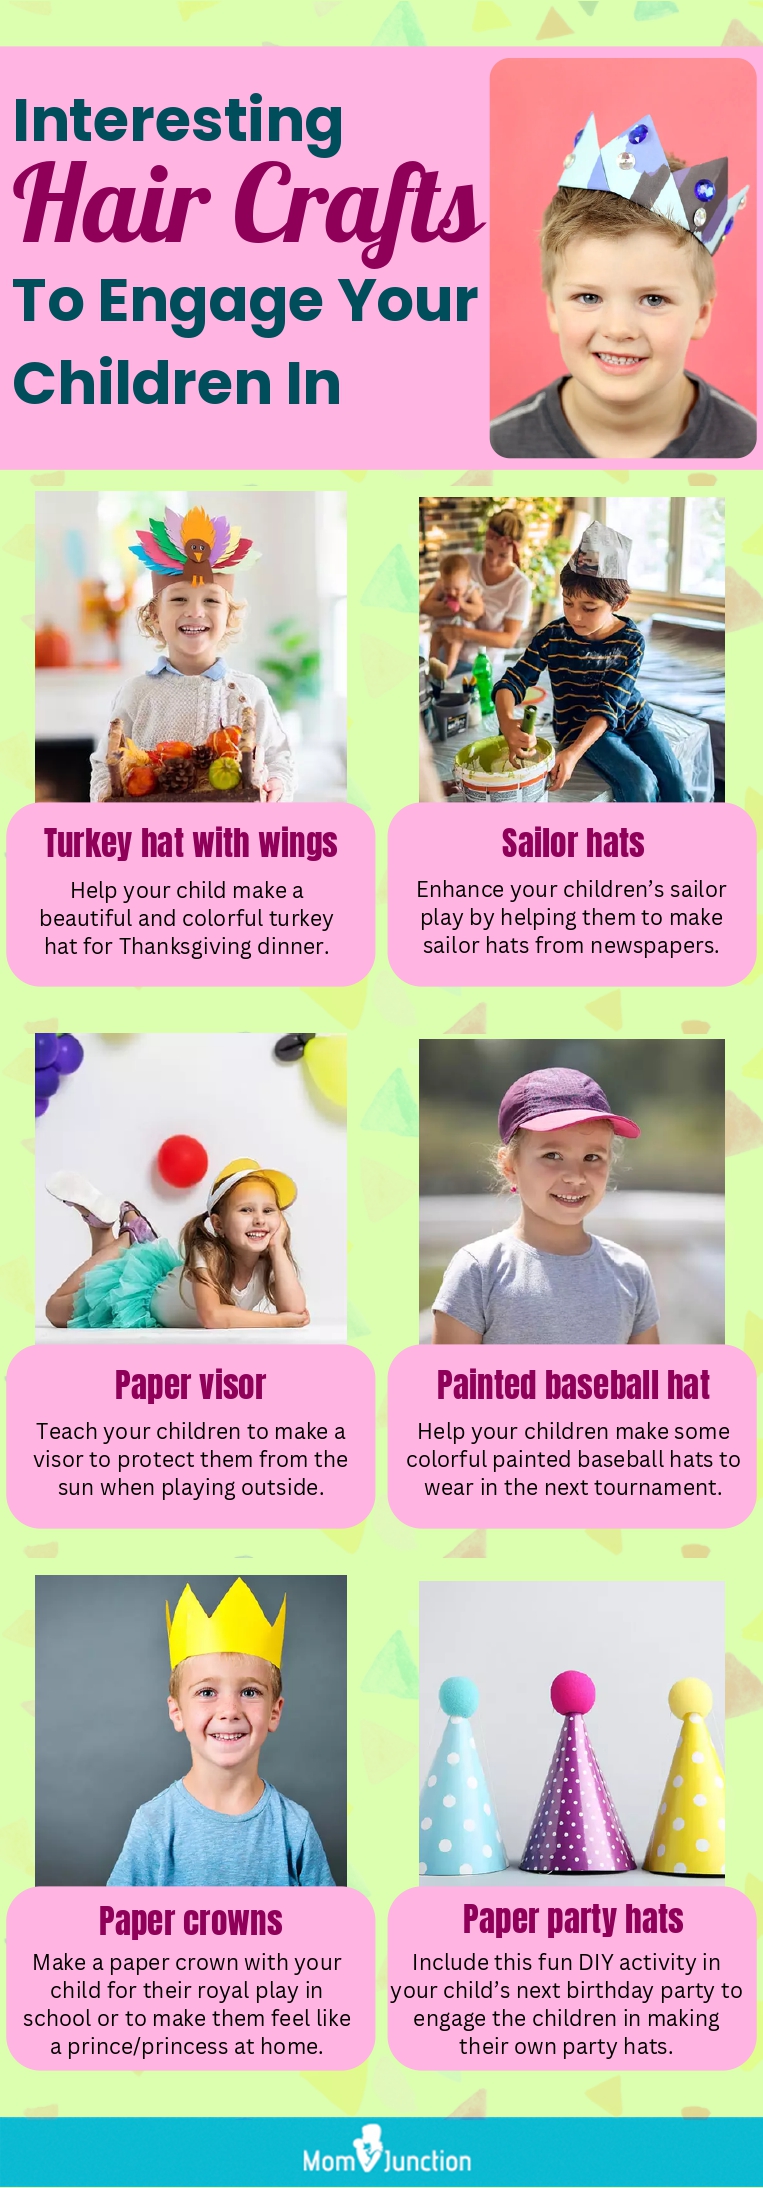 interesting hair crafts to engage your children in (infographic)